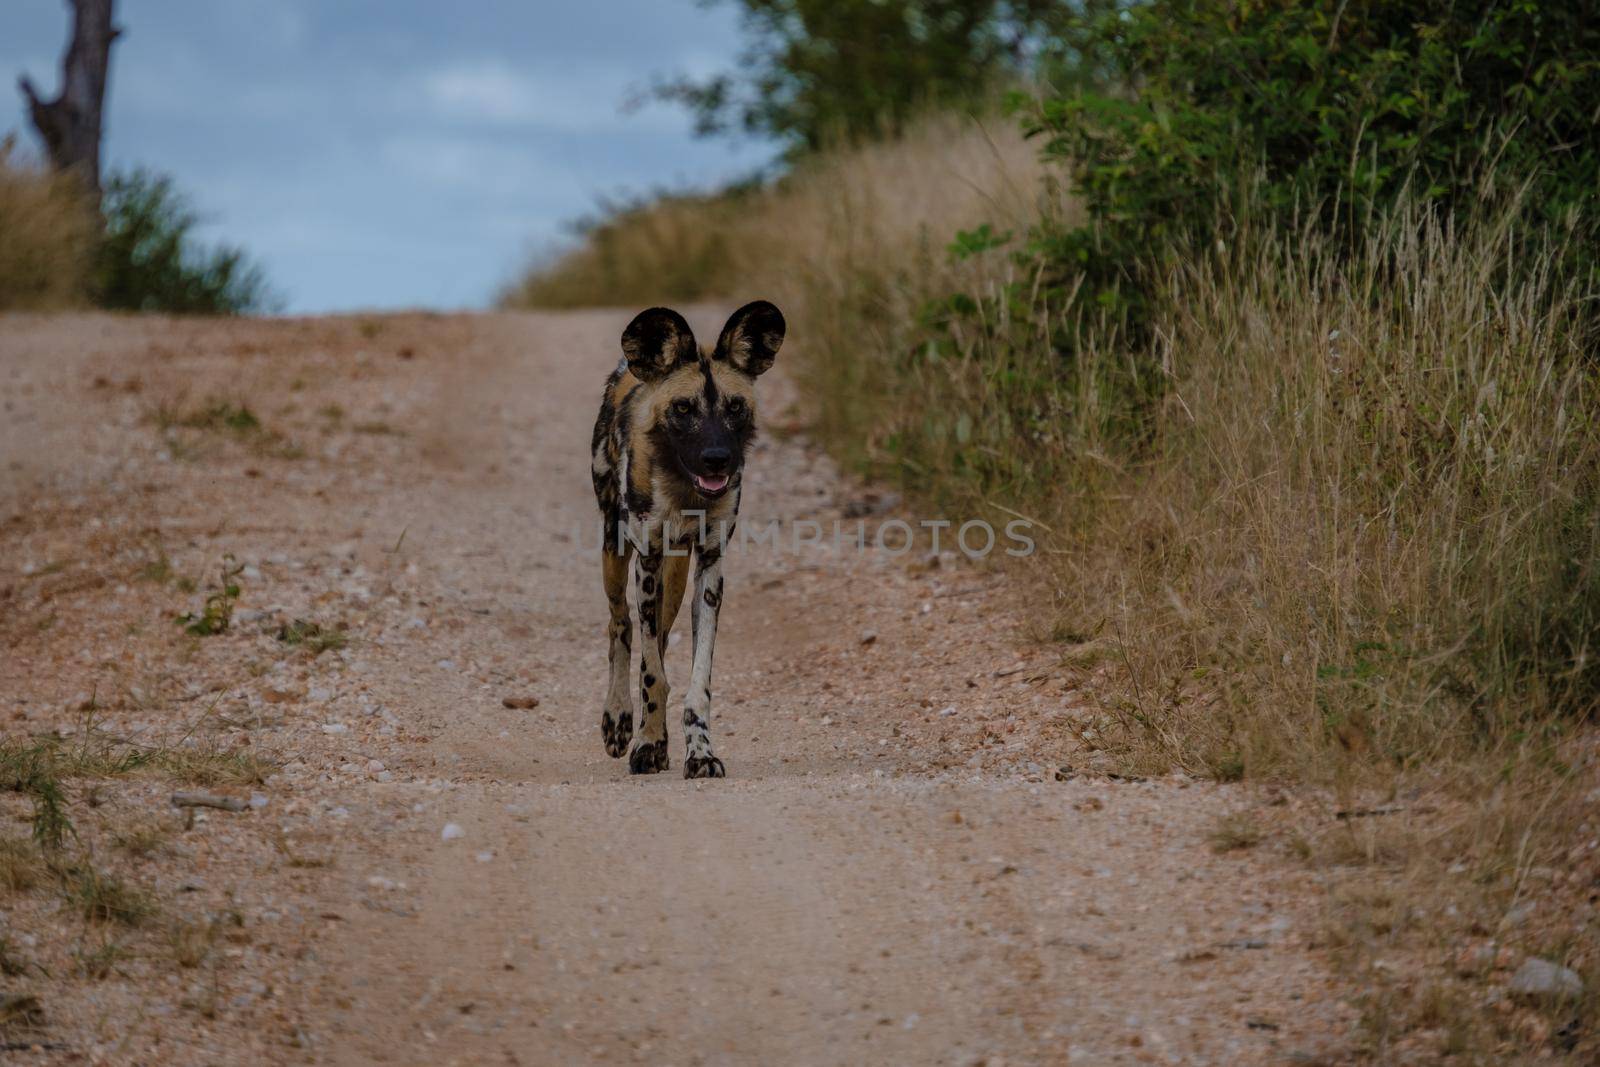 Wild dog at the The Klaserie Private Nature Reserve part of the Kruger national park in South Africa by fokkebok